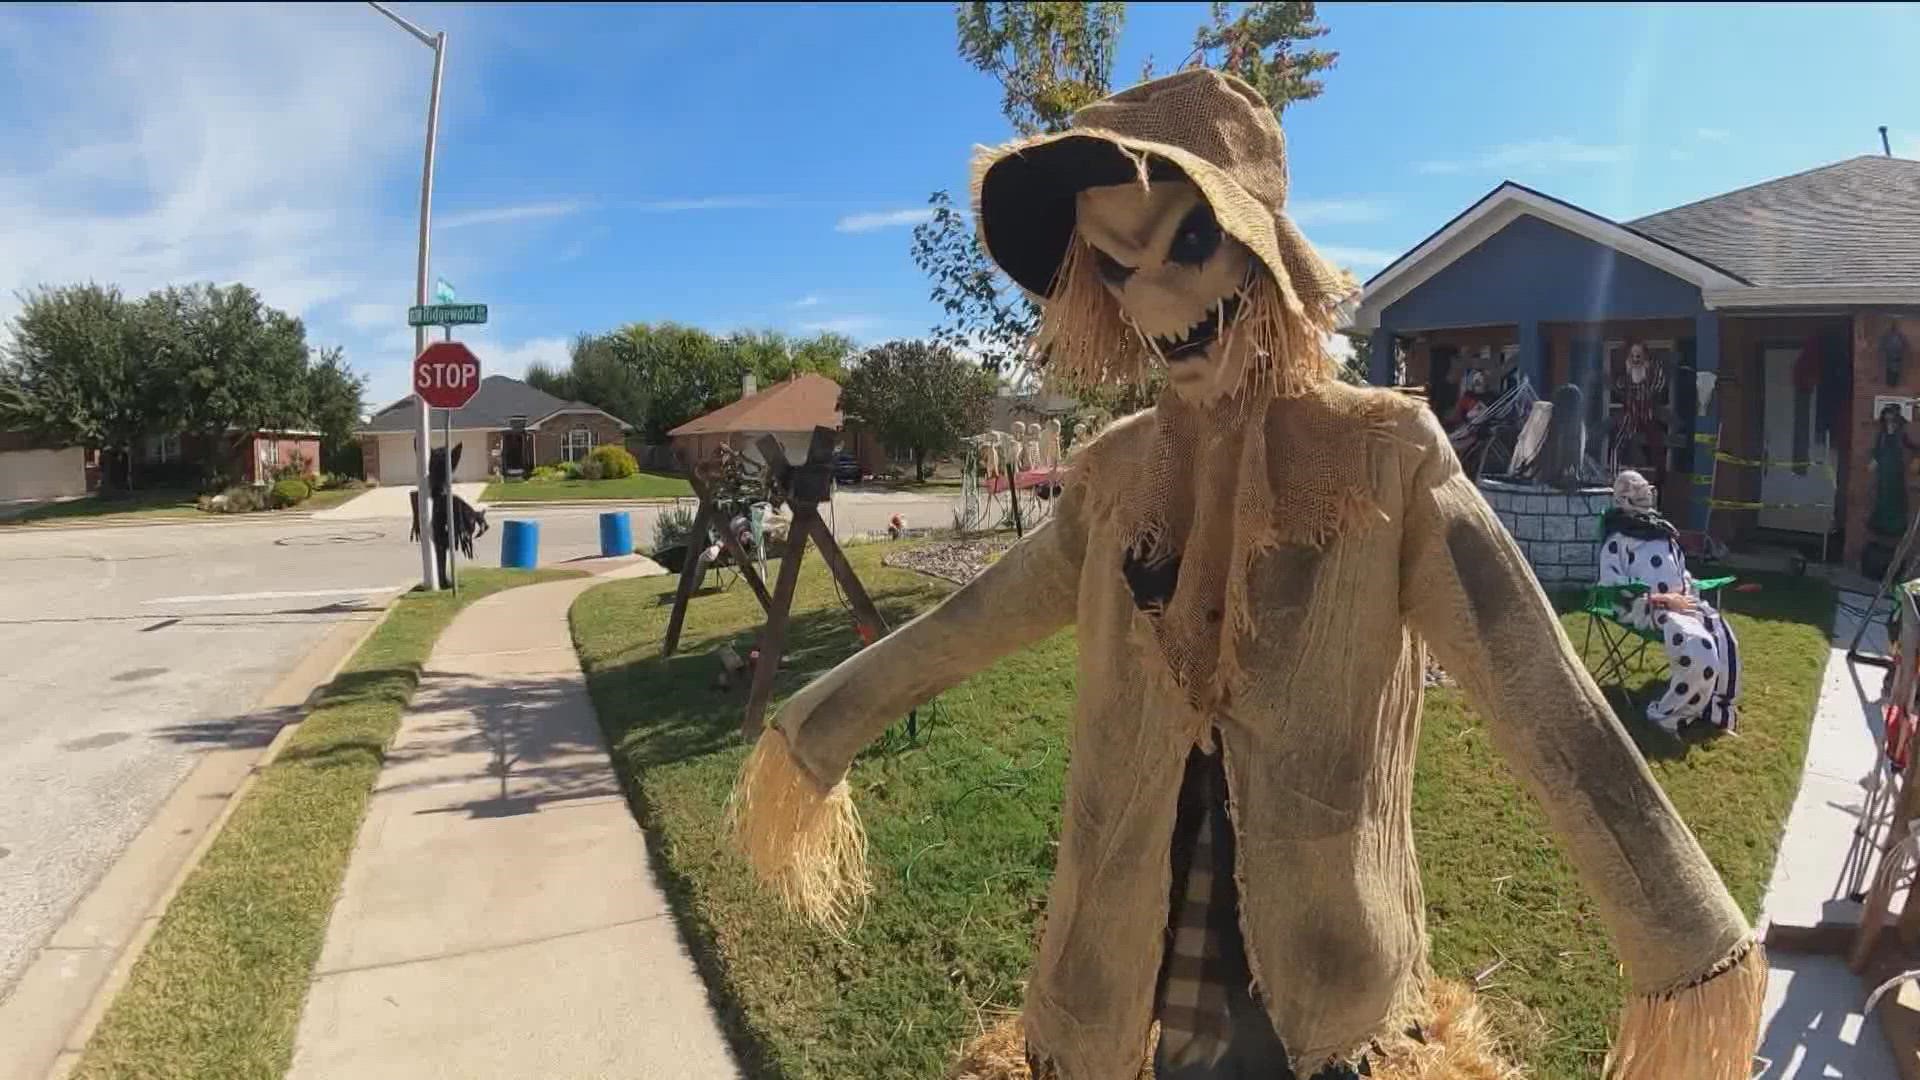 One Leander family goes all out for Halloween. Their law is filled with Halloween decorations – and they do it all for a good cause.